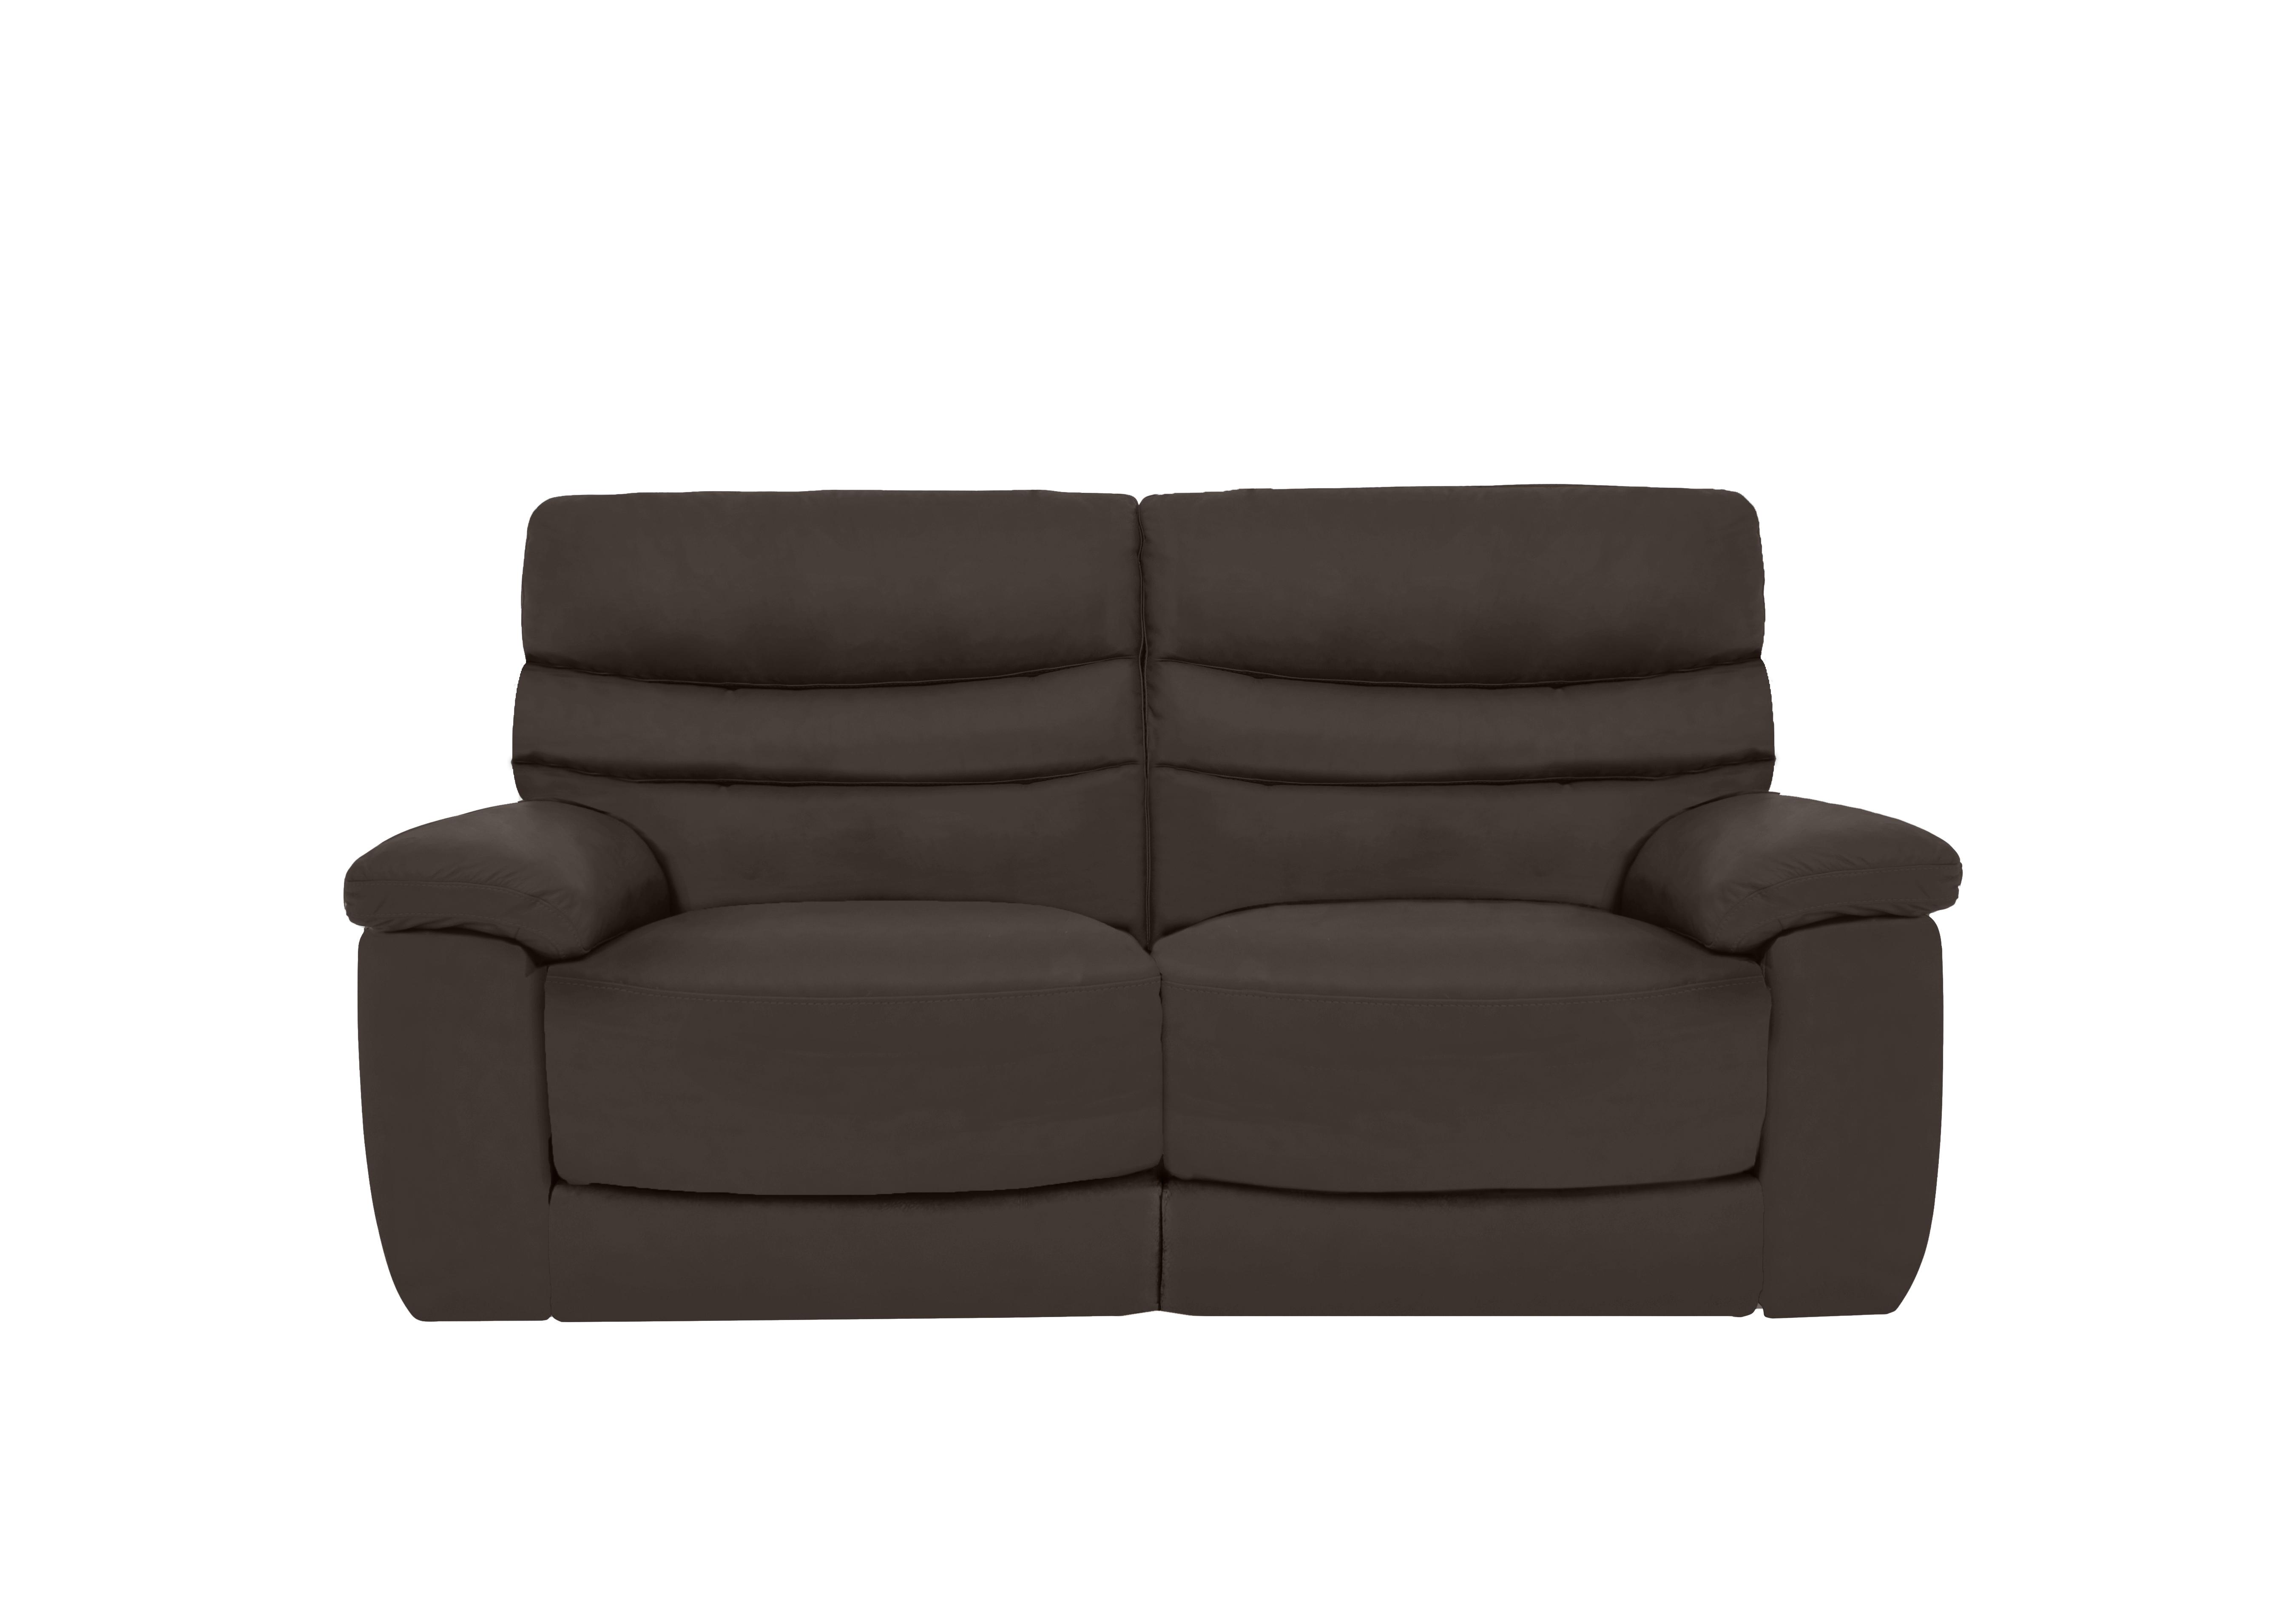 Nimbus 2 Seater Leather Power Recliner Sofa with Power Headrests in Bx-037c Walnut on Furniture Village